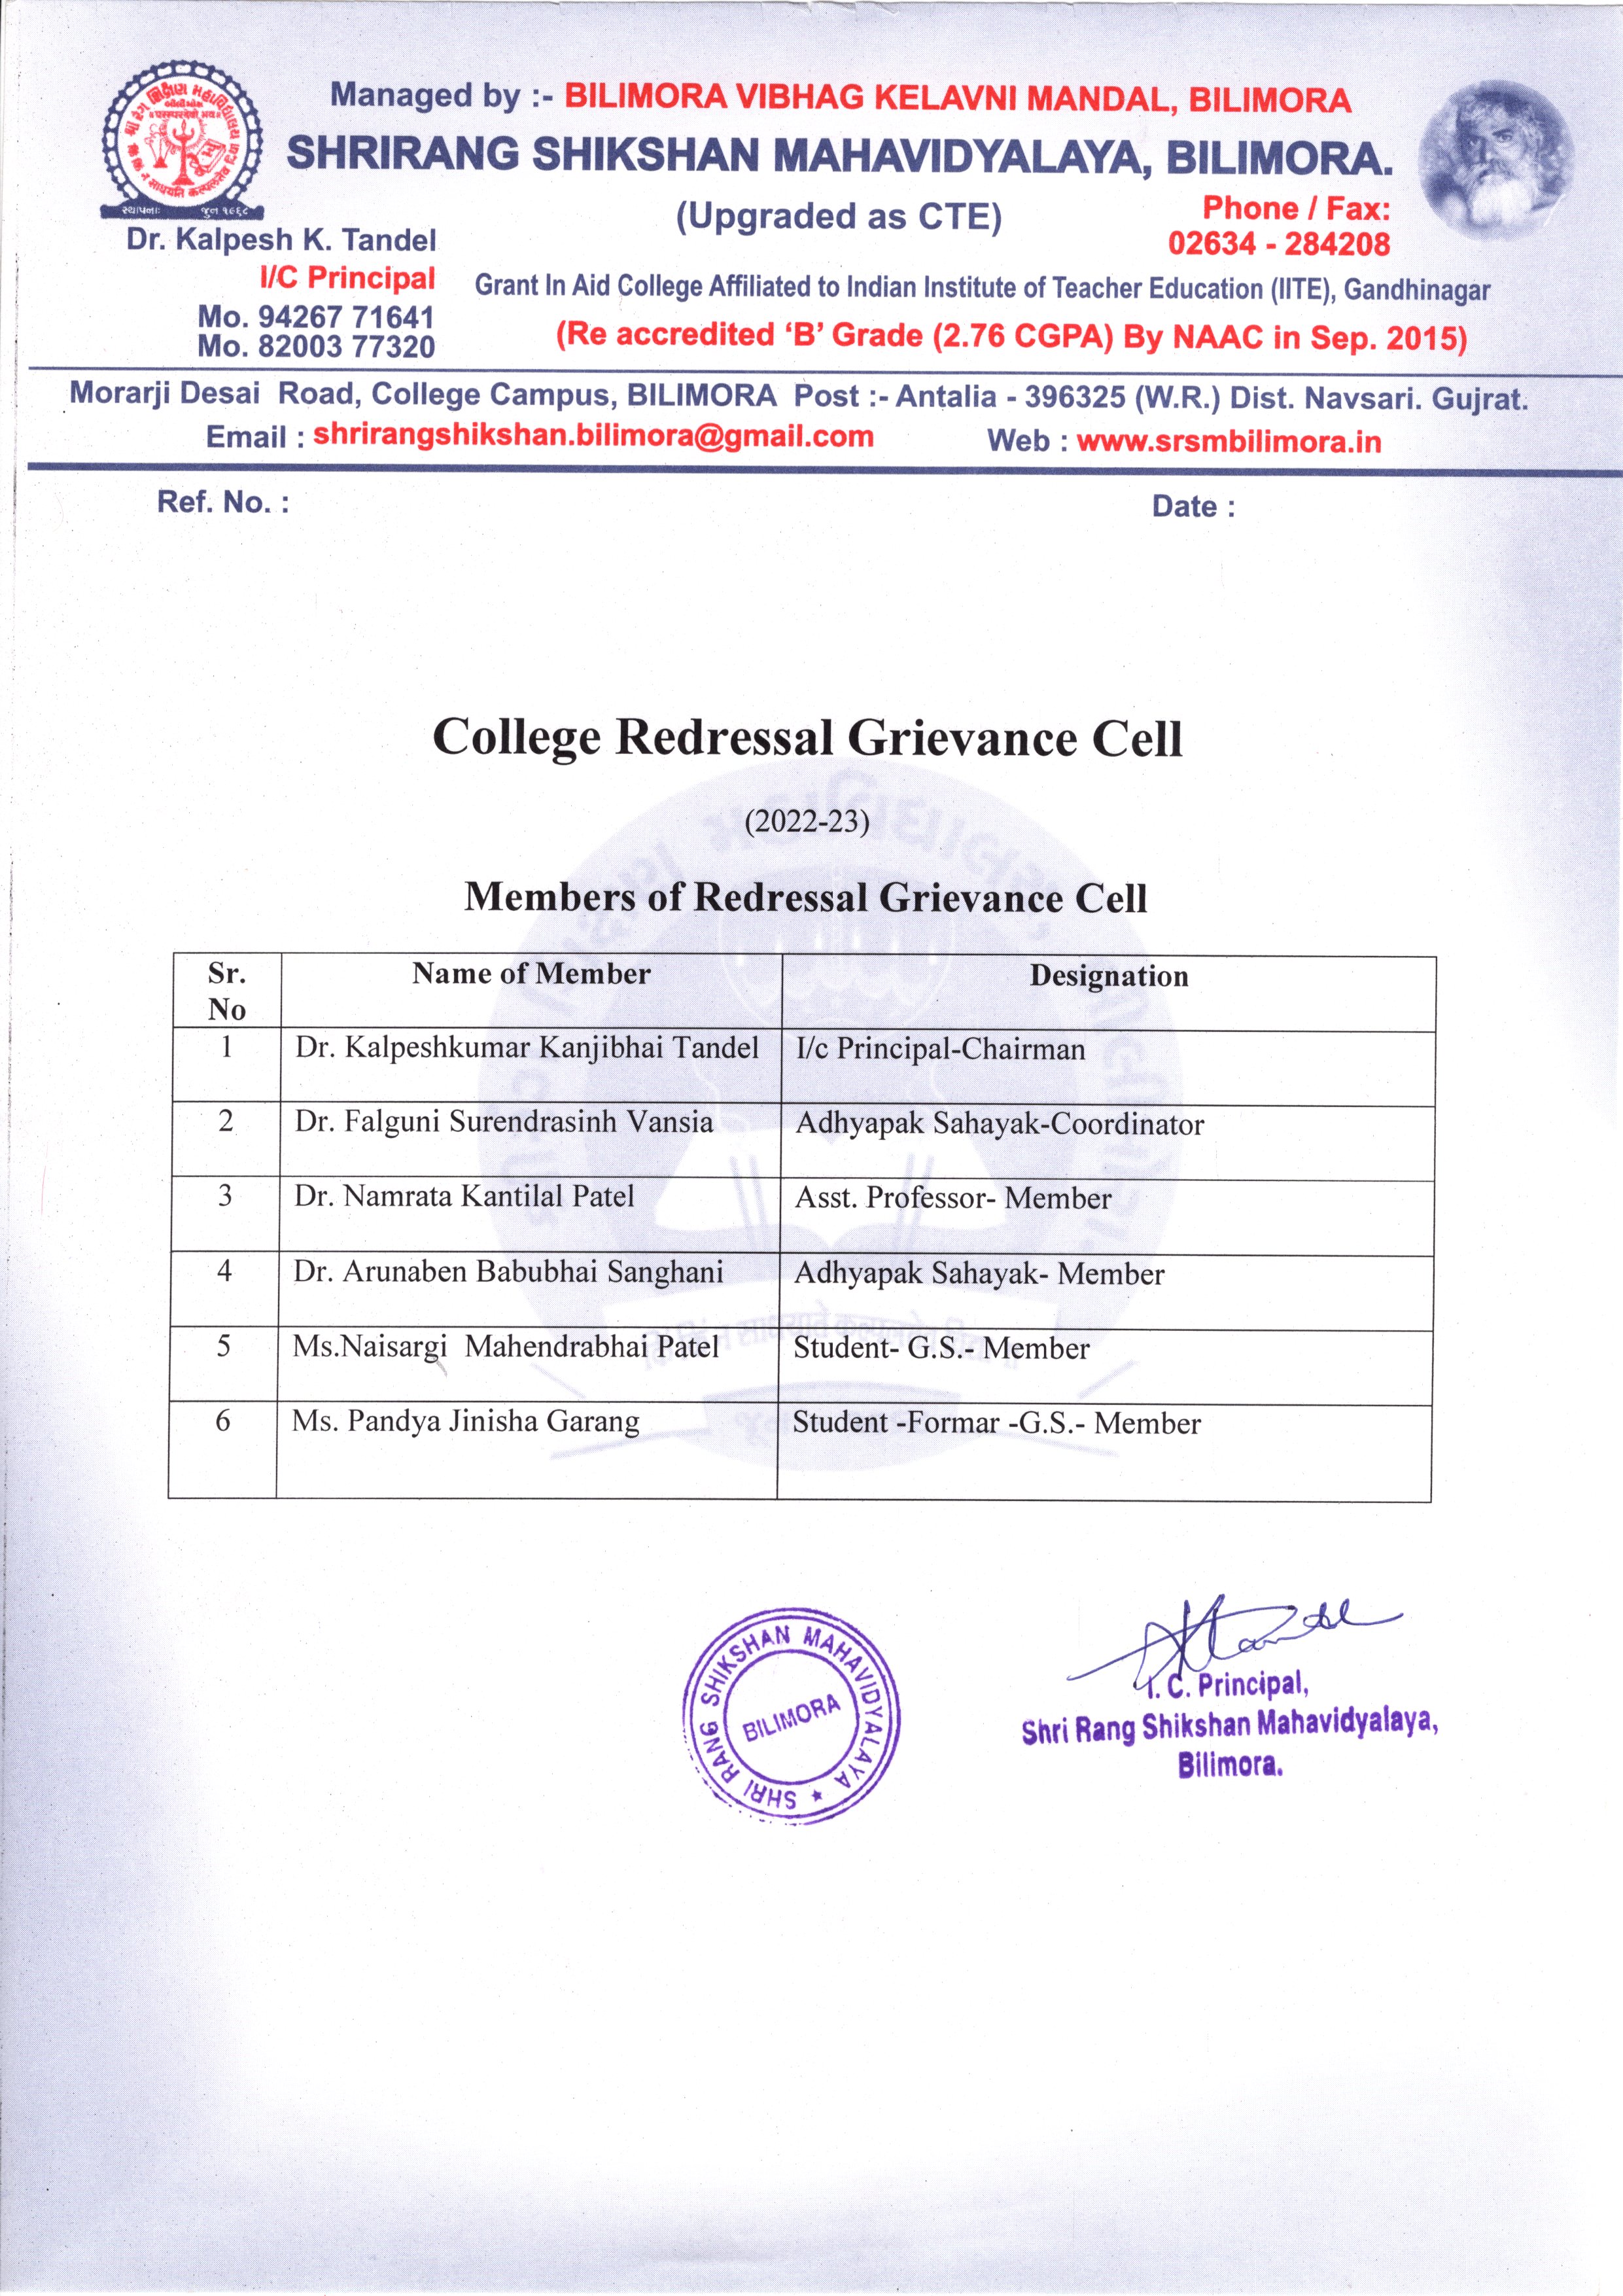 College Grievance Redressal Cell 2022-23